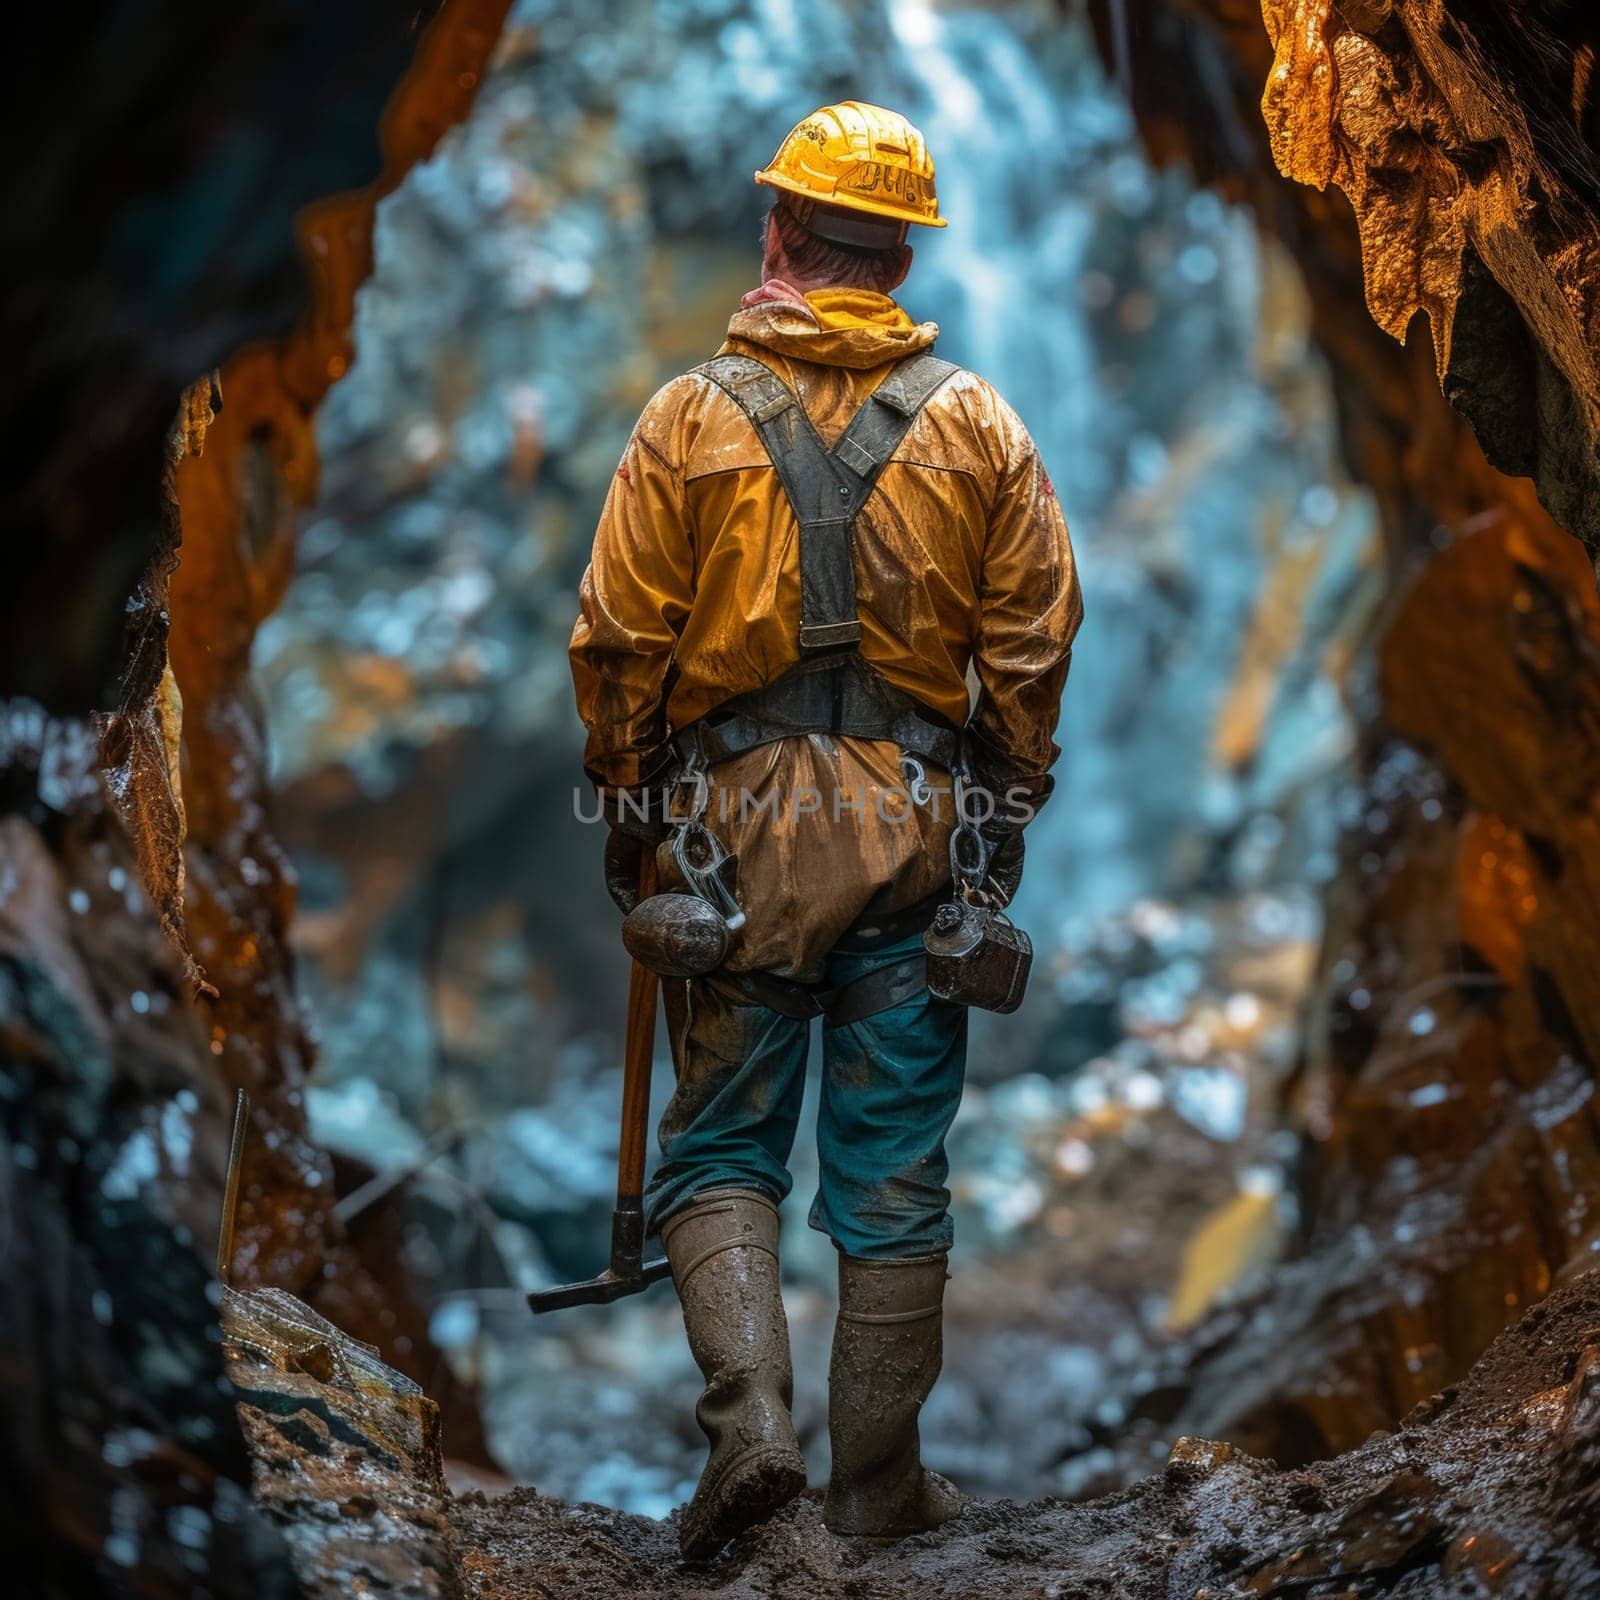 Miner in reflective gear standing in a mine shaft, contemplating the ore-rich passage. by sfinks